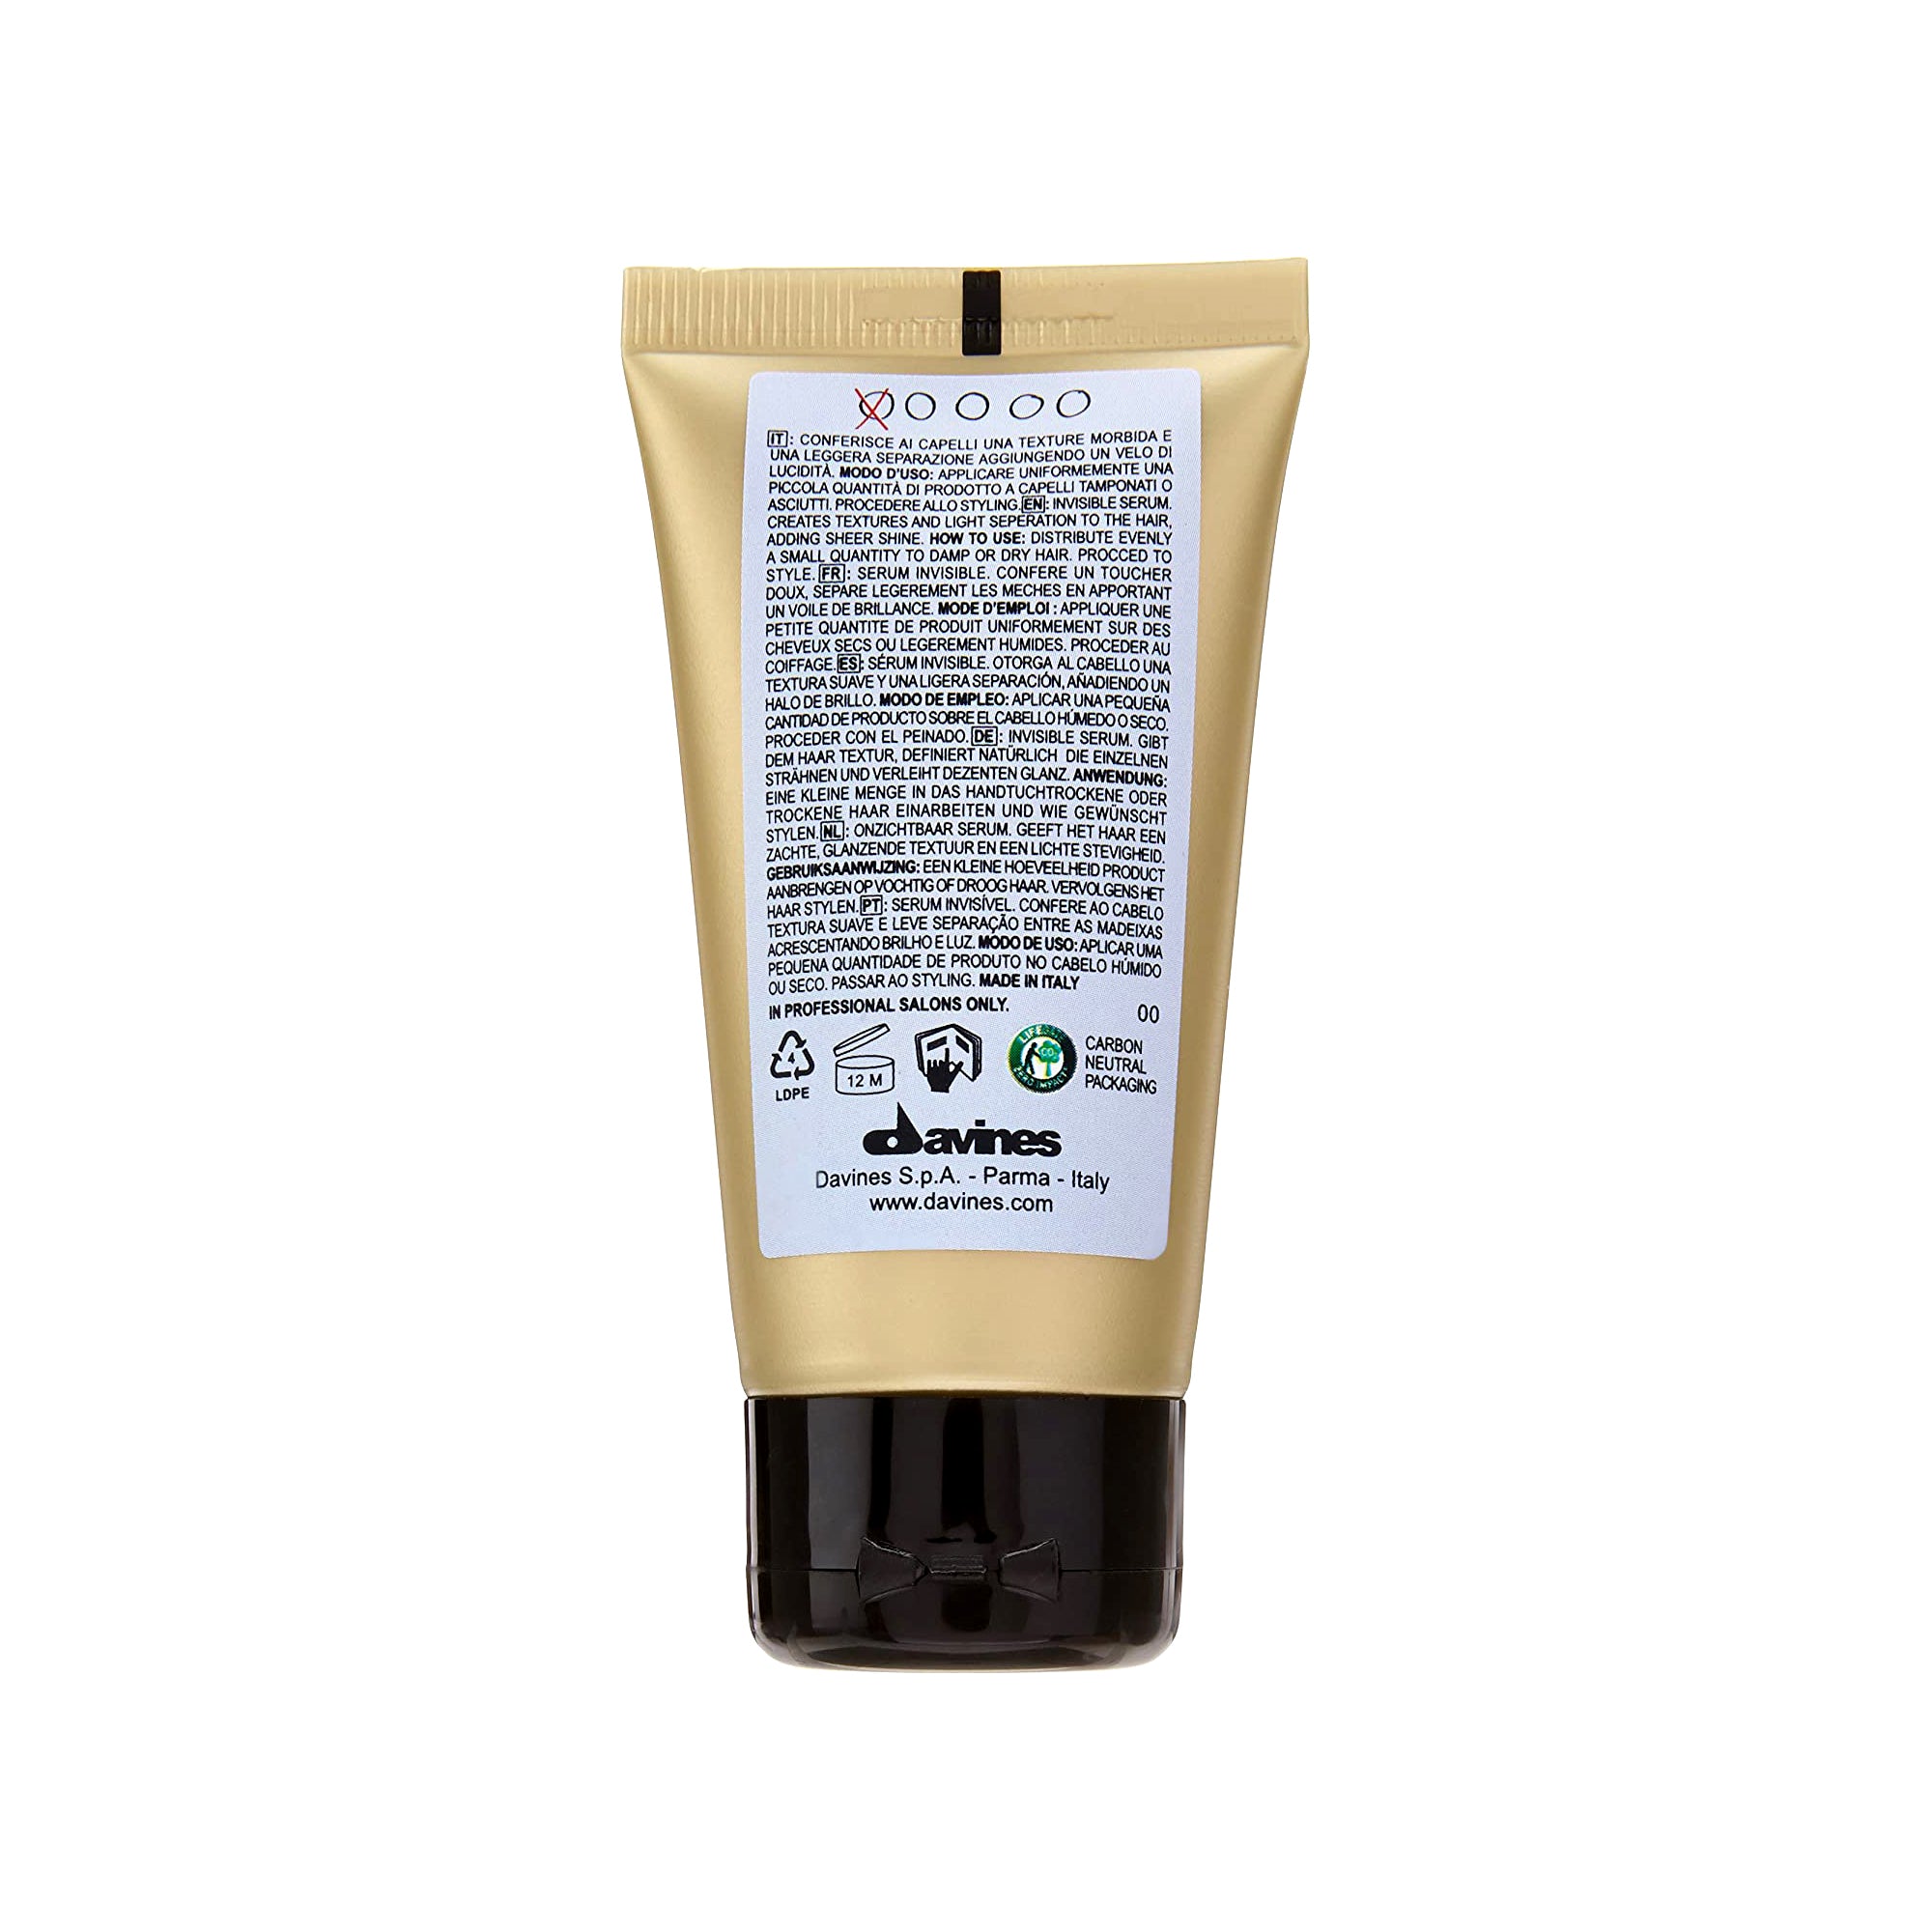 Davines This is an Invisible Serum / 1.6 oz